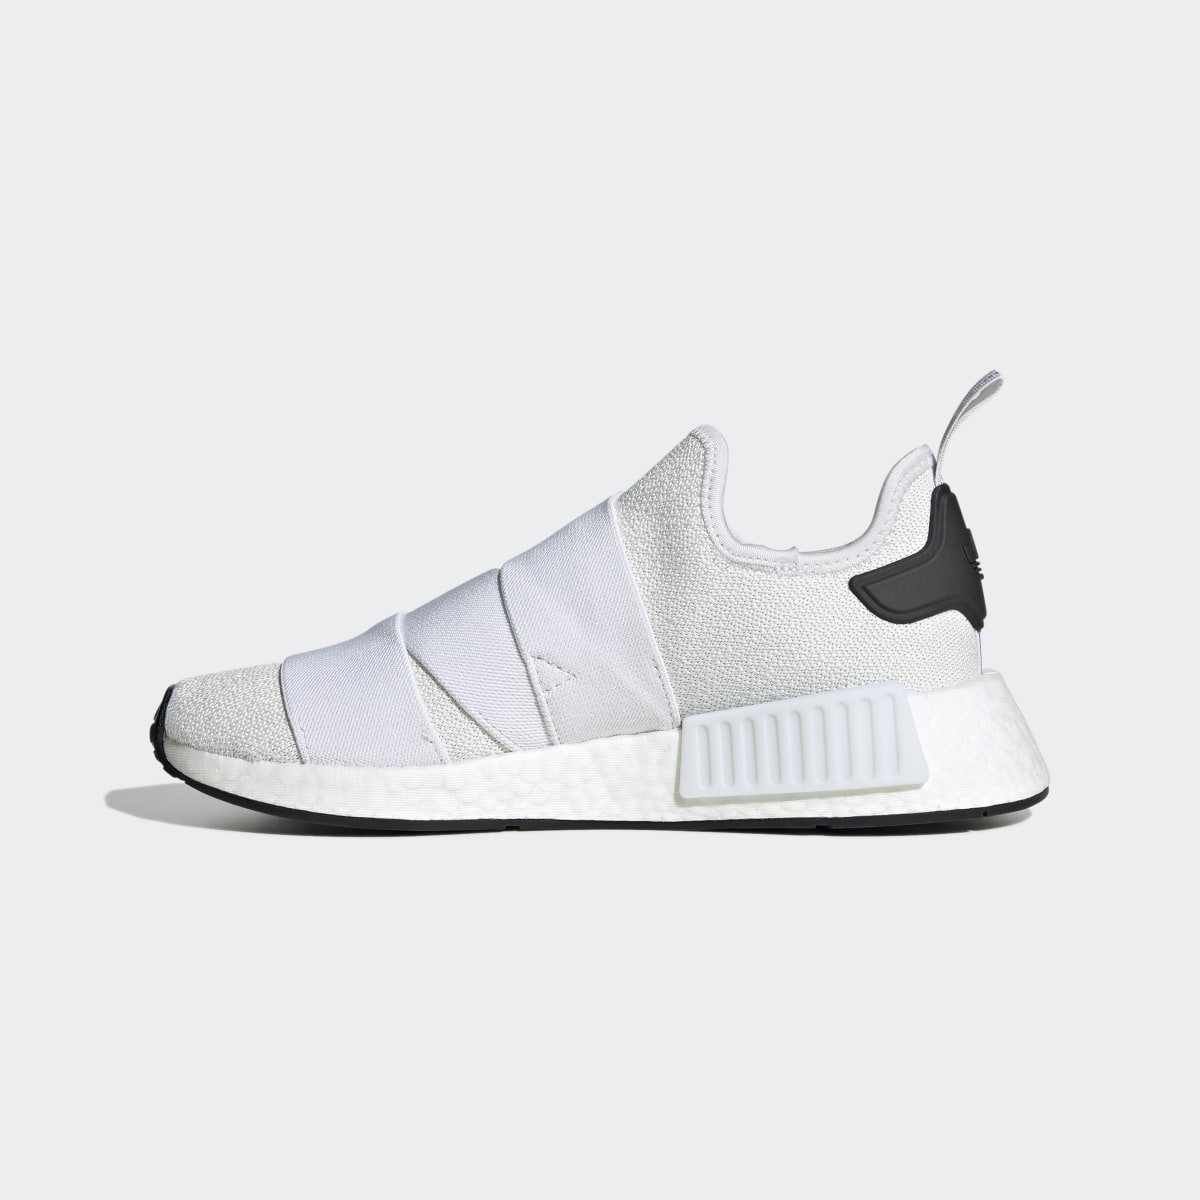 Adidas NMD_R1 Strap Shoes. 7